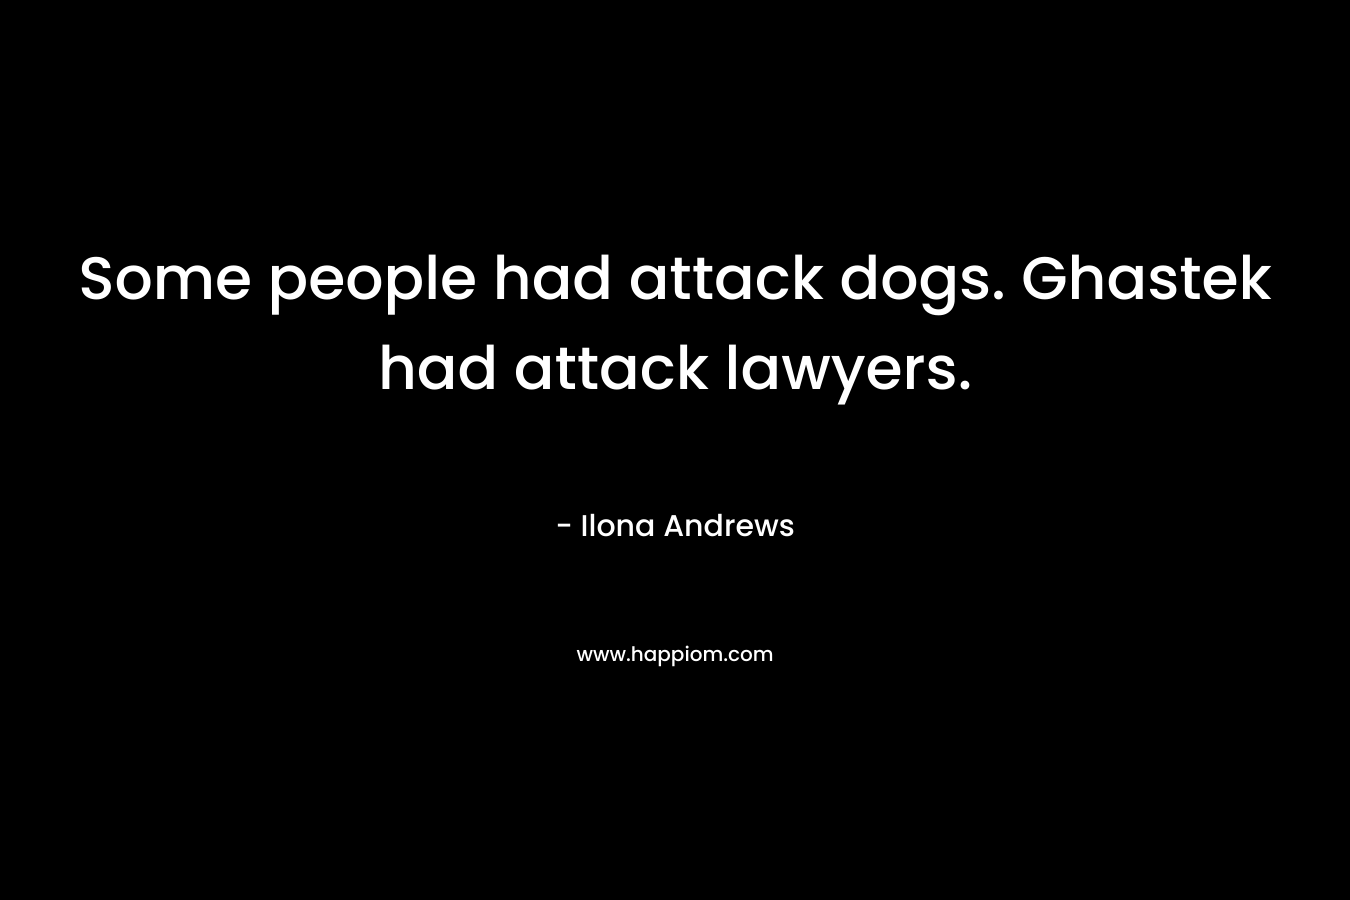 Some people had attack dogs. Ghastek had attack lawyers. – Ilona Andrews